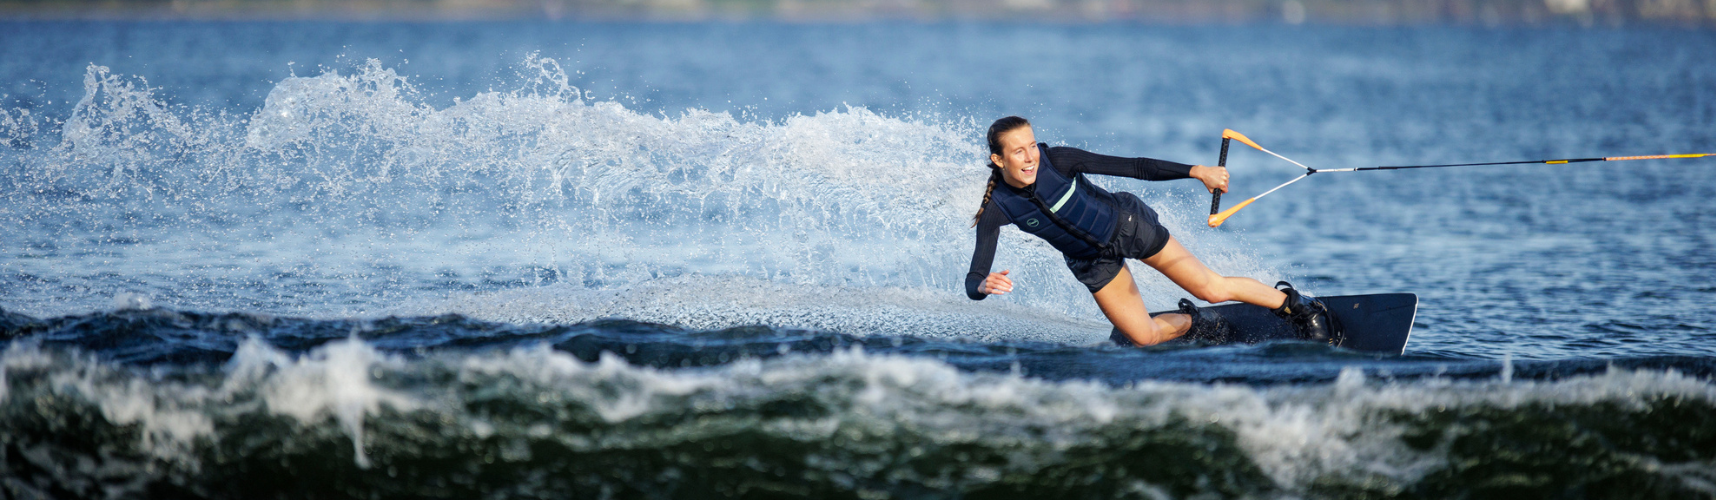 Woman wakeboarding and holding onto a wakeboard rope